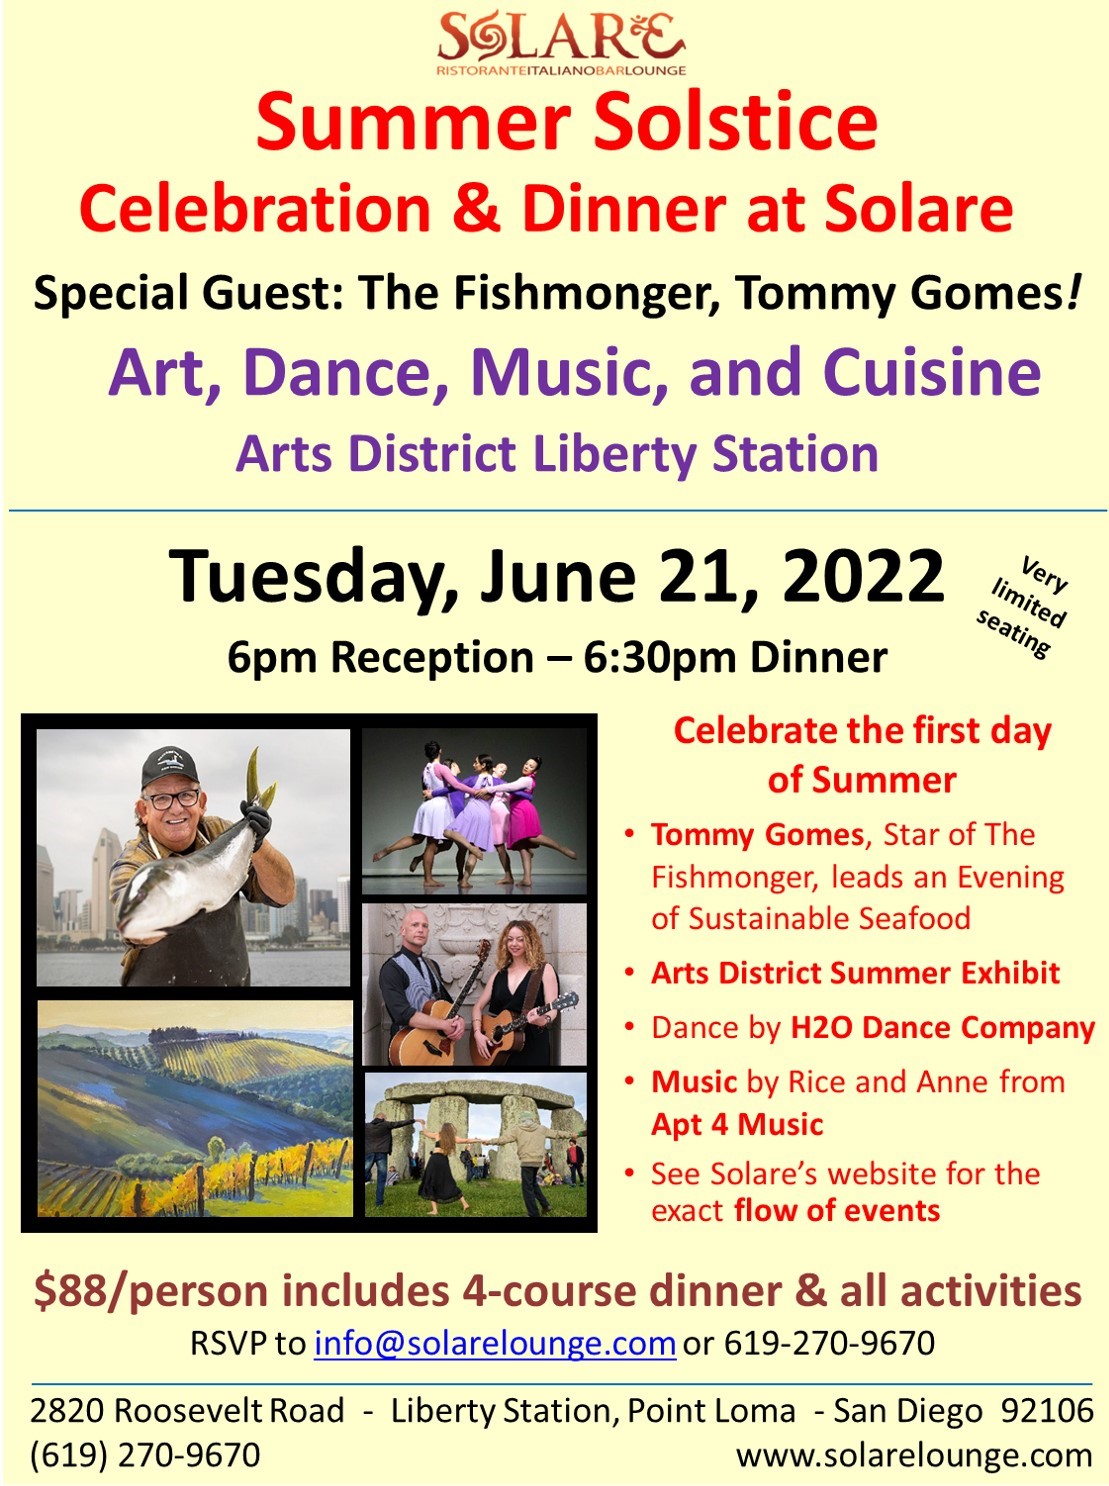 <a id="Solare-Summer-Solstice-Celebration-and-Dinner"></a>Summer Solstice Celebration and Dinner - An Evening of Seafood with Tommy Gomes